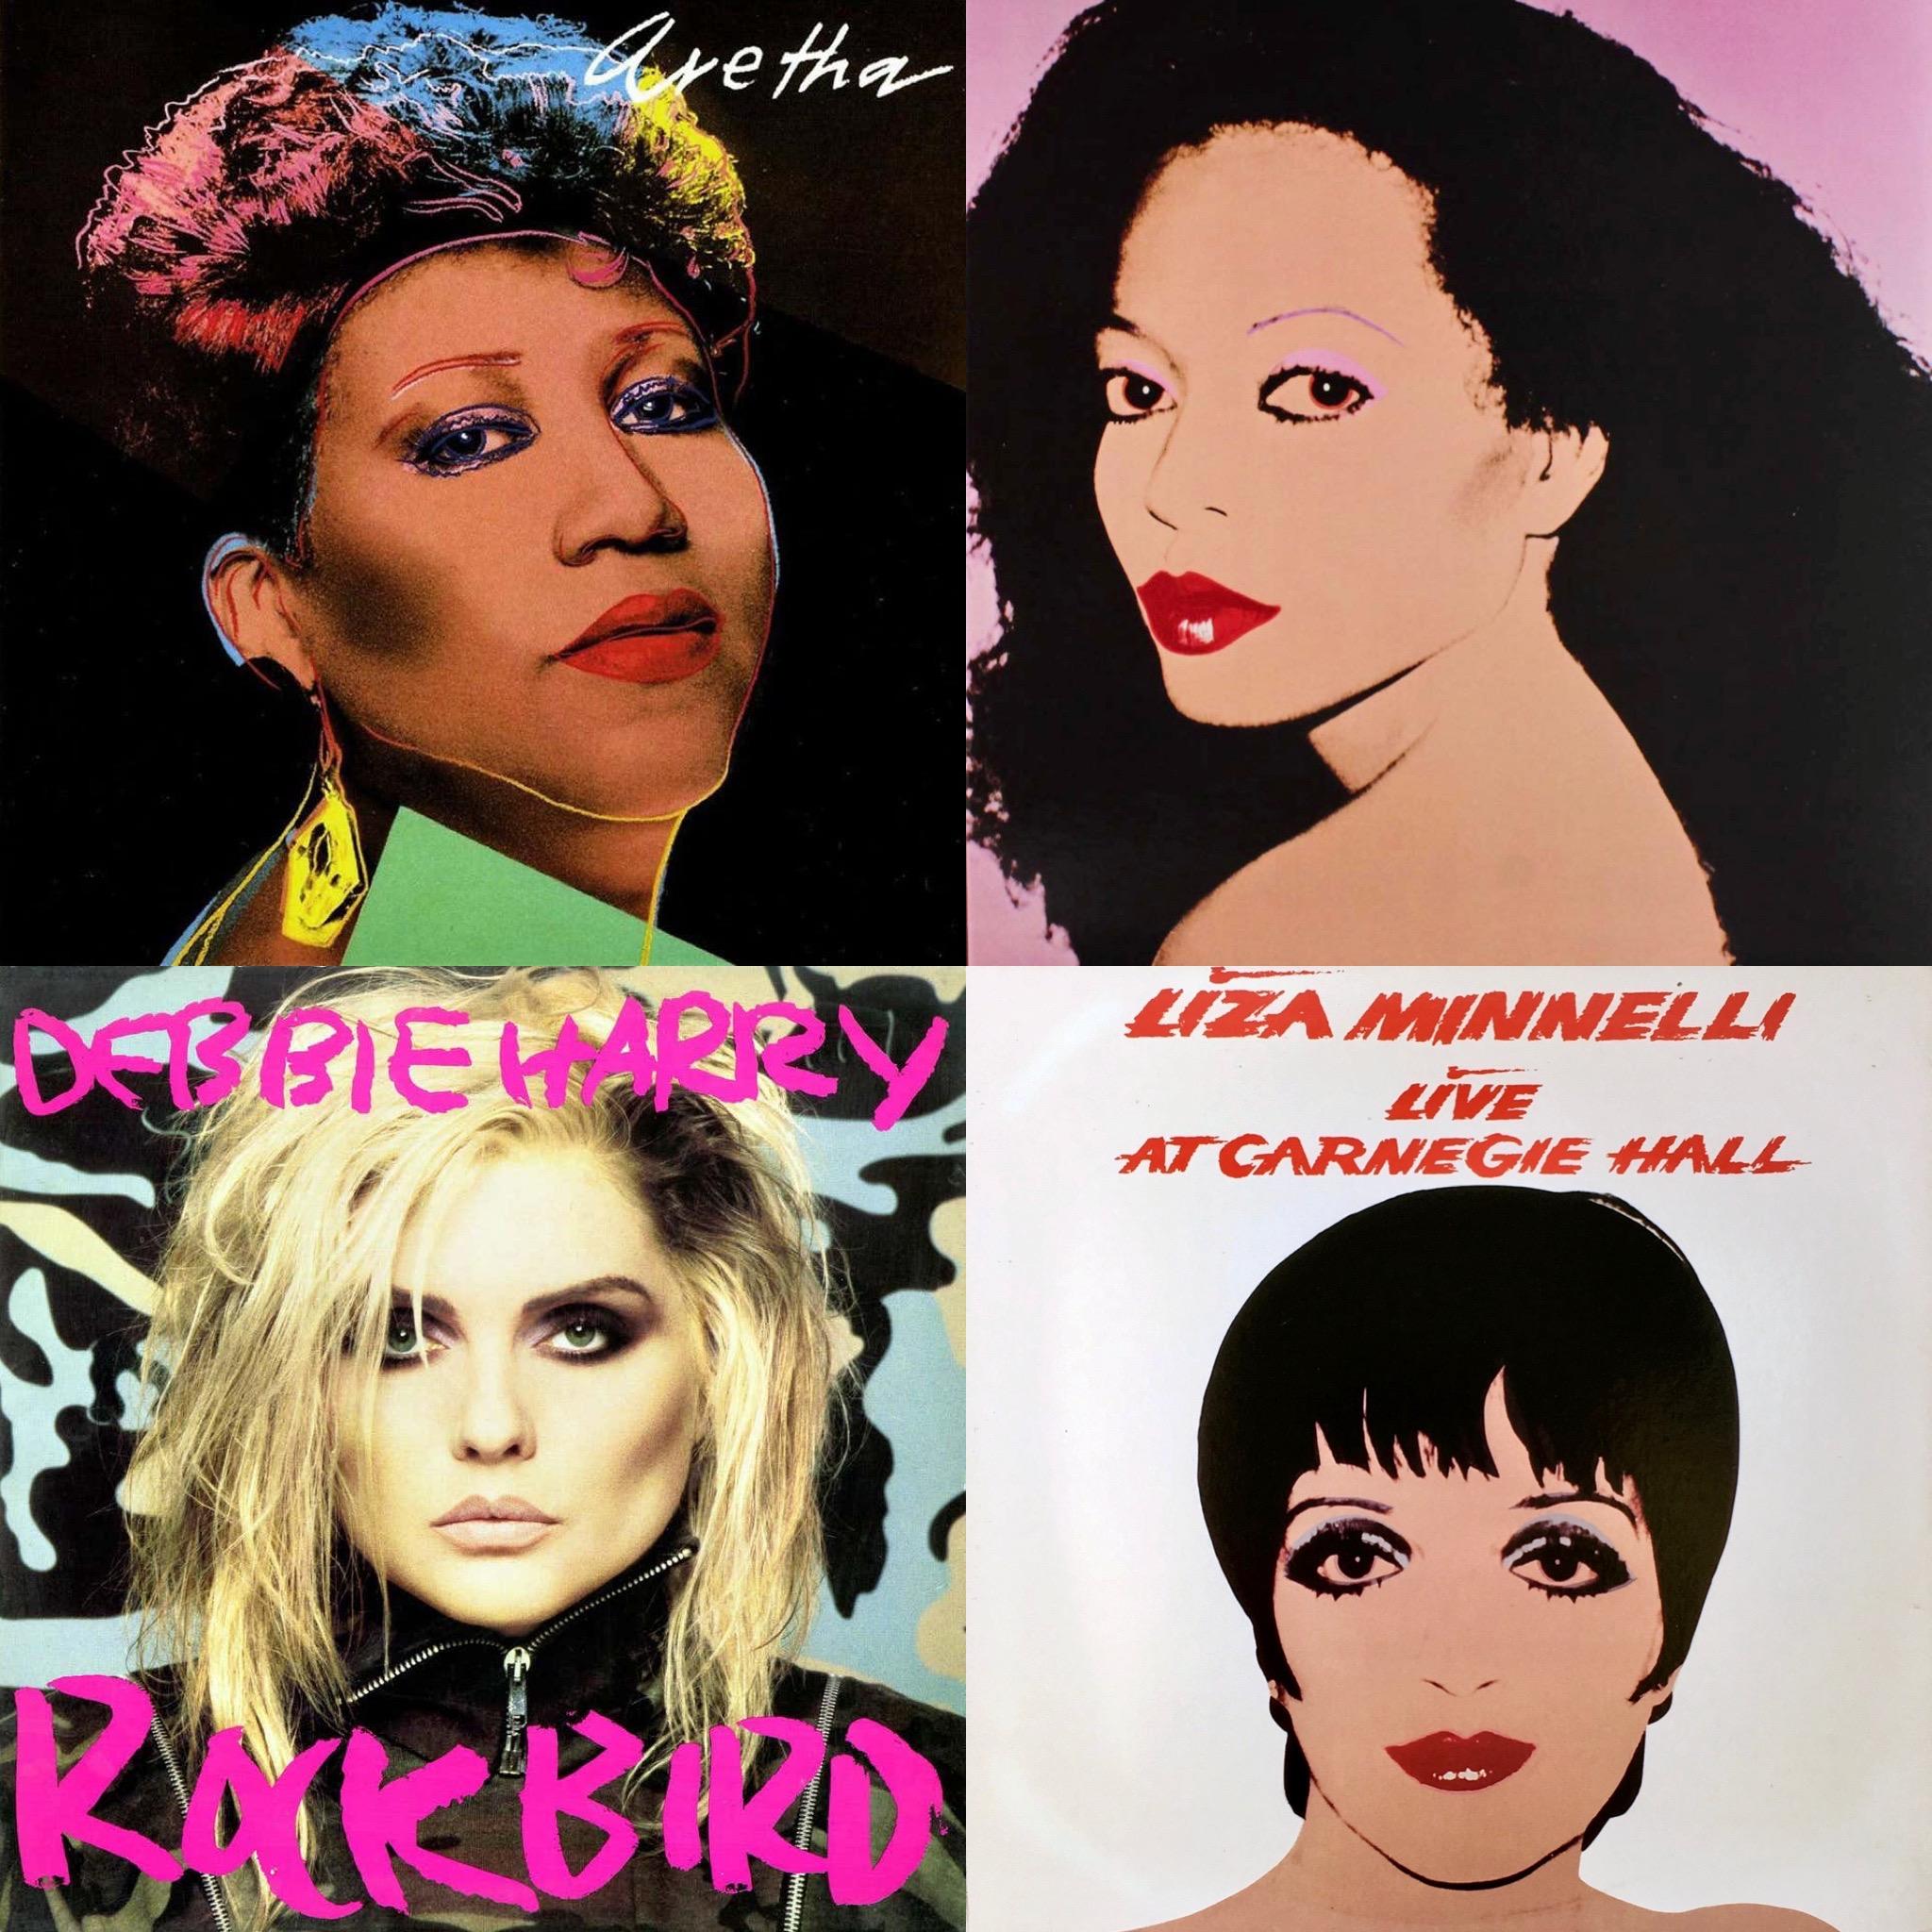 A collection of 4 LPs with individual cover art designed by Andy Warhol. Featuring the following recording artists & albums:
- Aretha by Aretha Franklin
- Silk Electric by Diana Ross
- Rockbird by Debbie Harry
- Live At Carnegie Hall by Liza